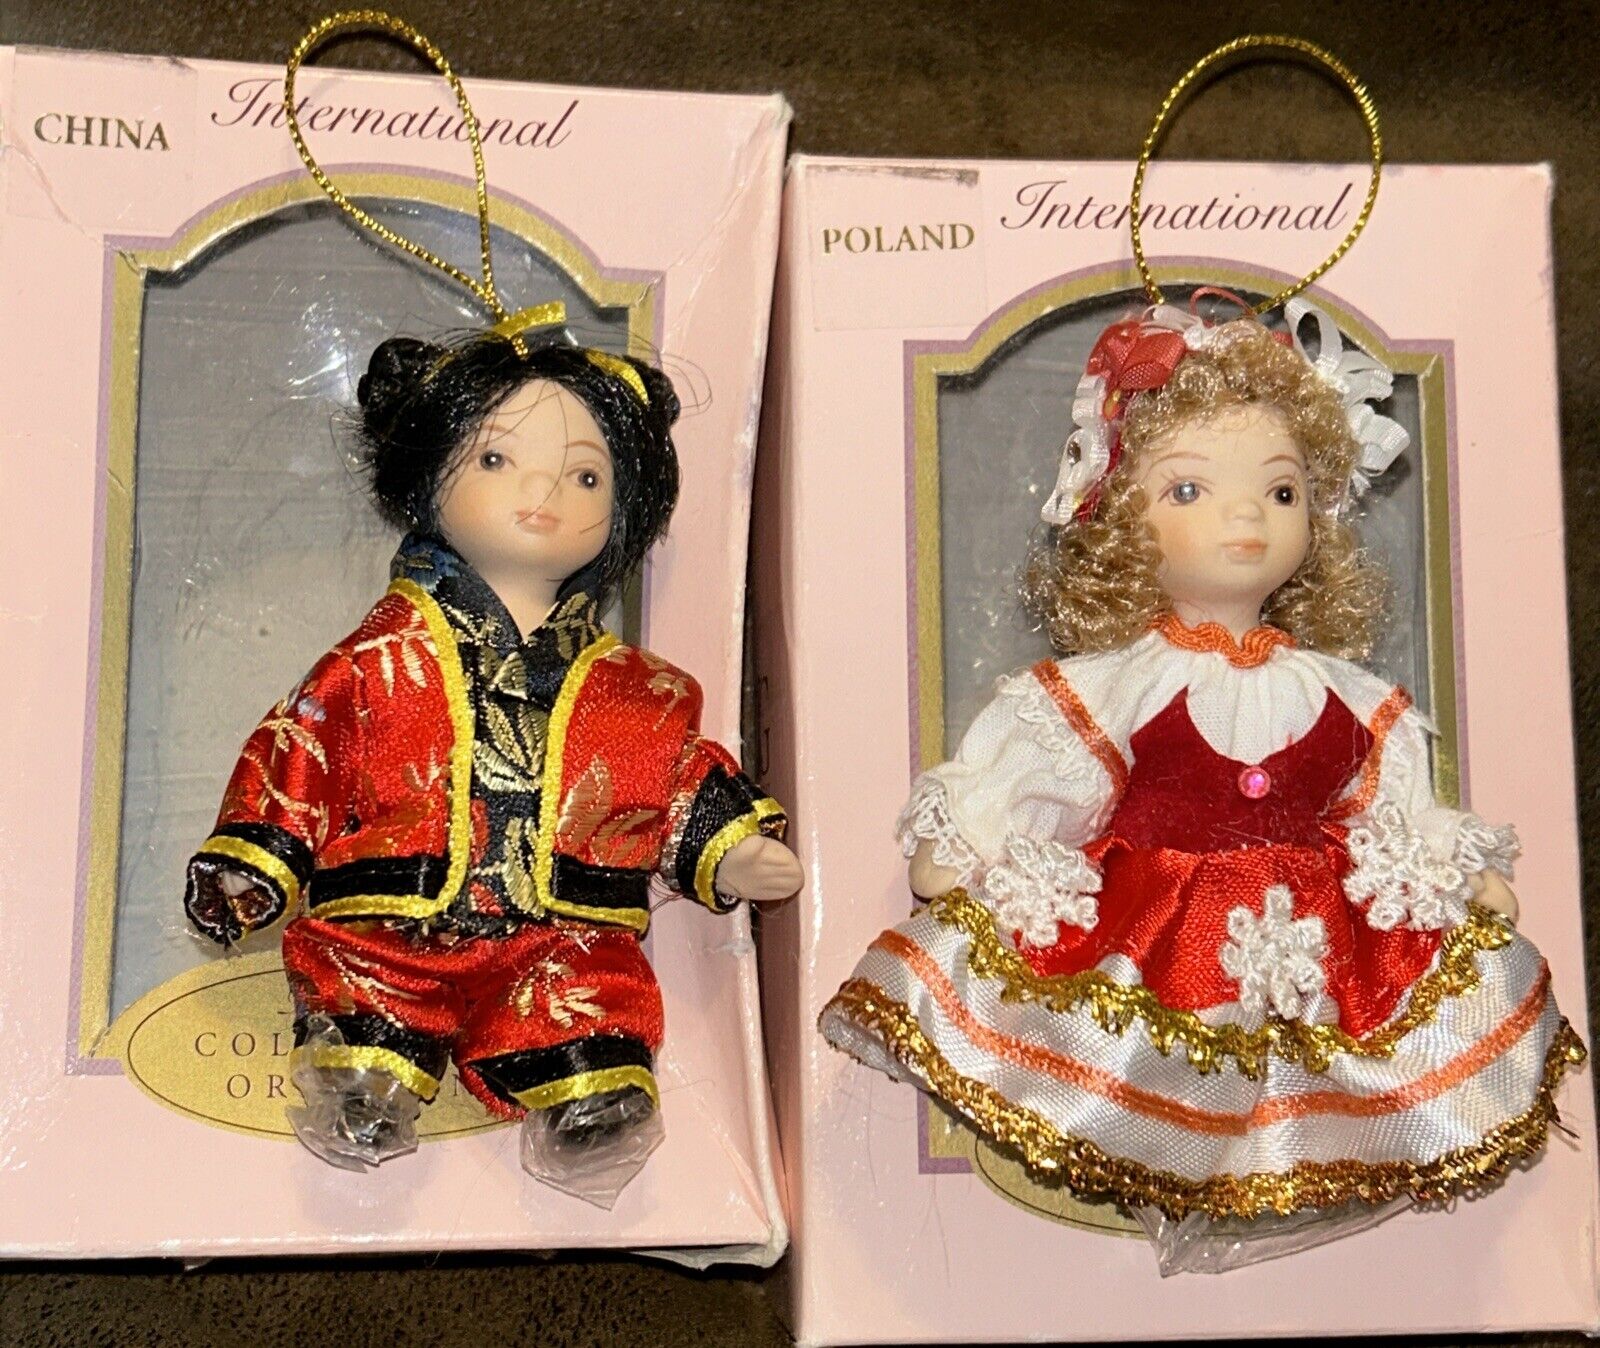 Vtg DG Creations Hand Painted China & Poland Doll Christmas Ornaments Set of 2